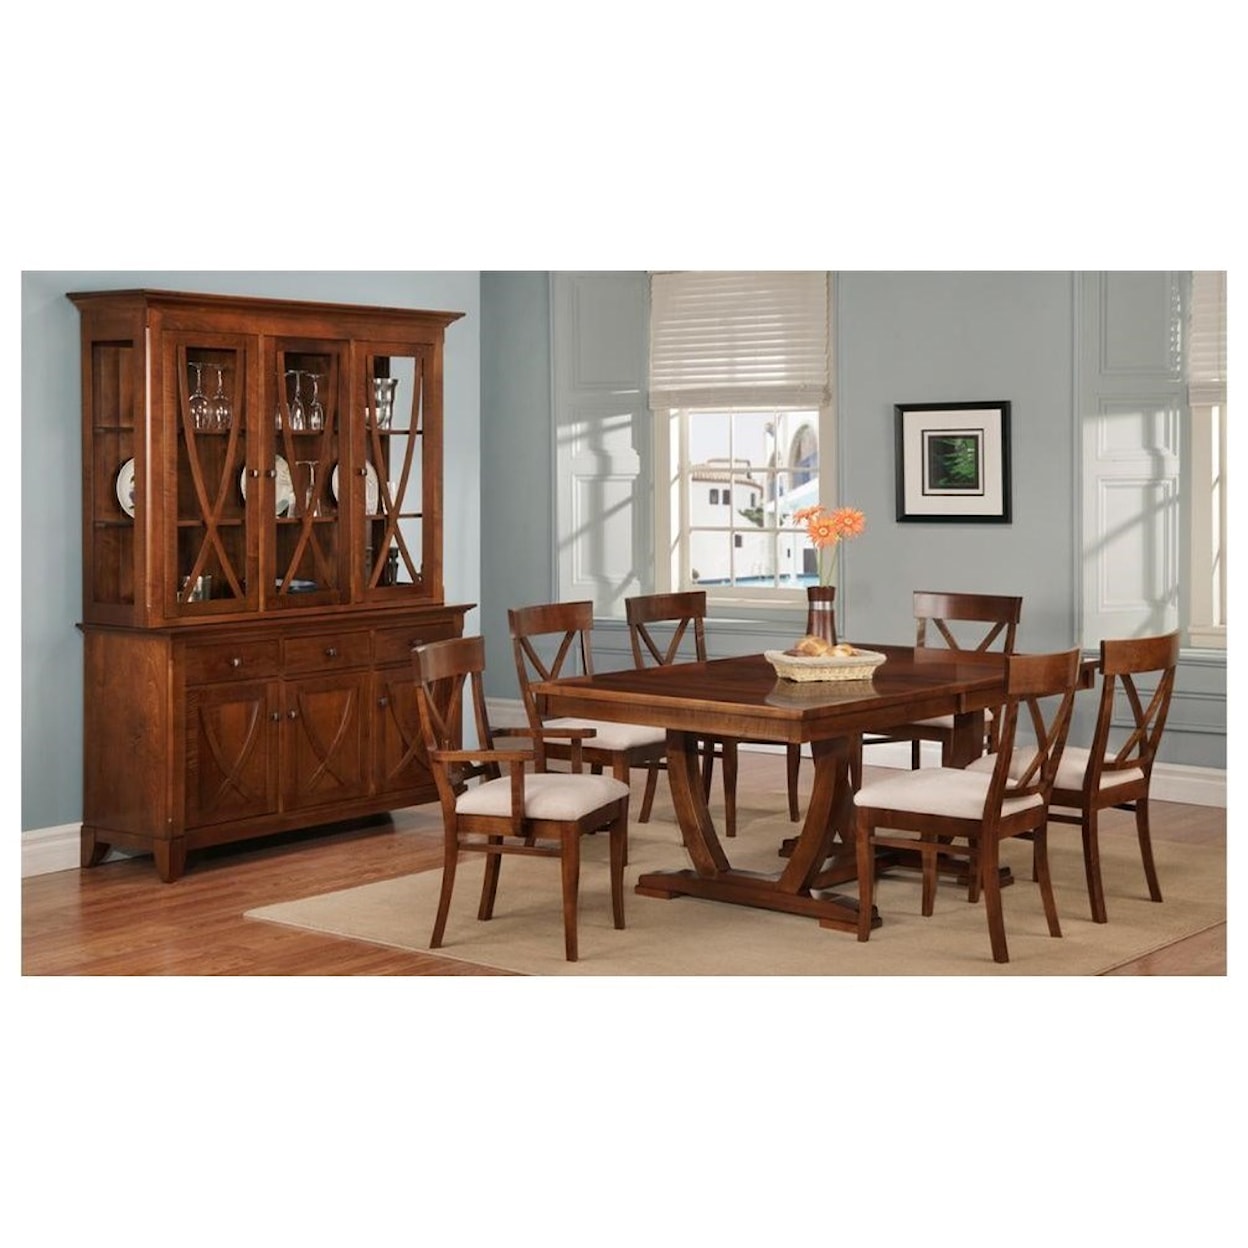 Handstone Florence 42x72" Trestle Dining Table